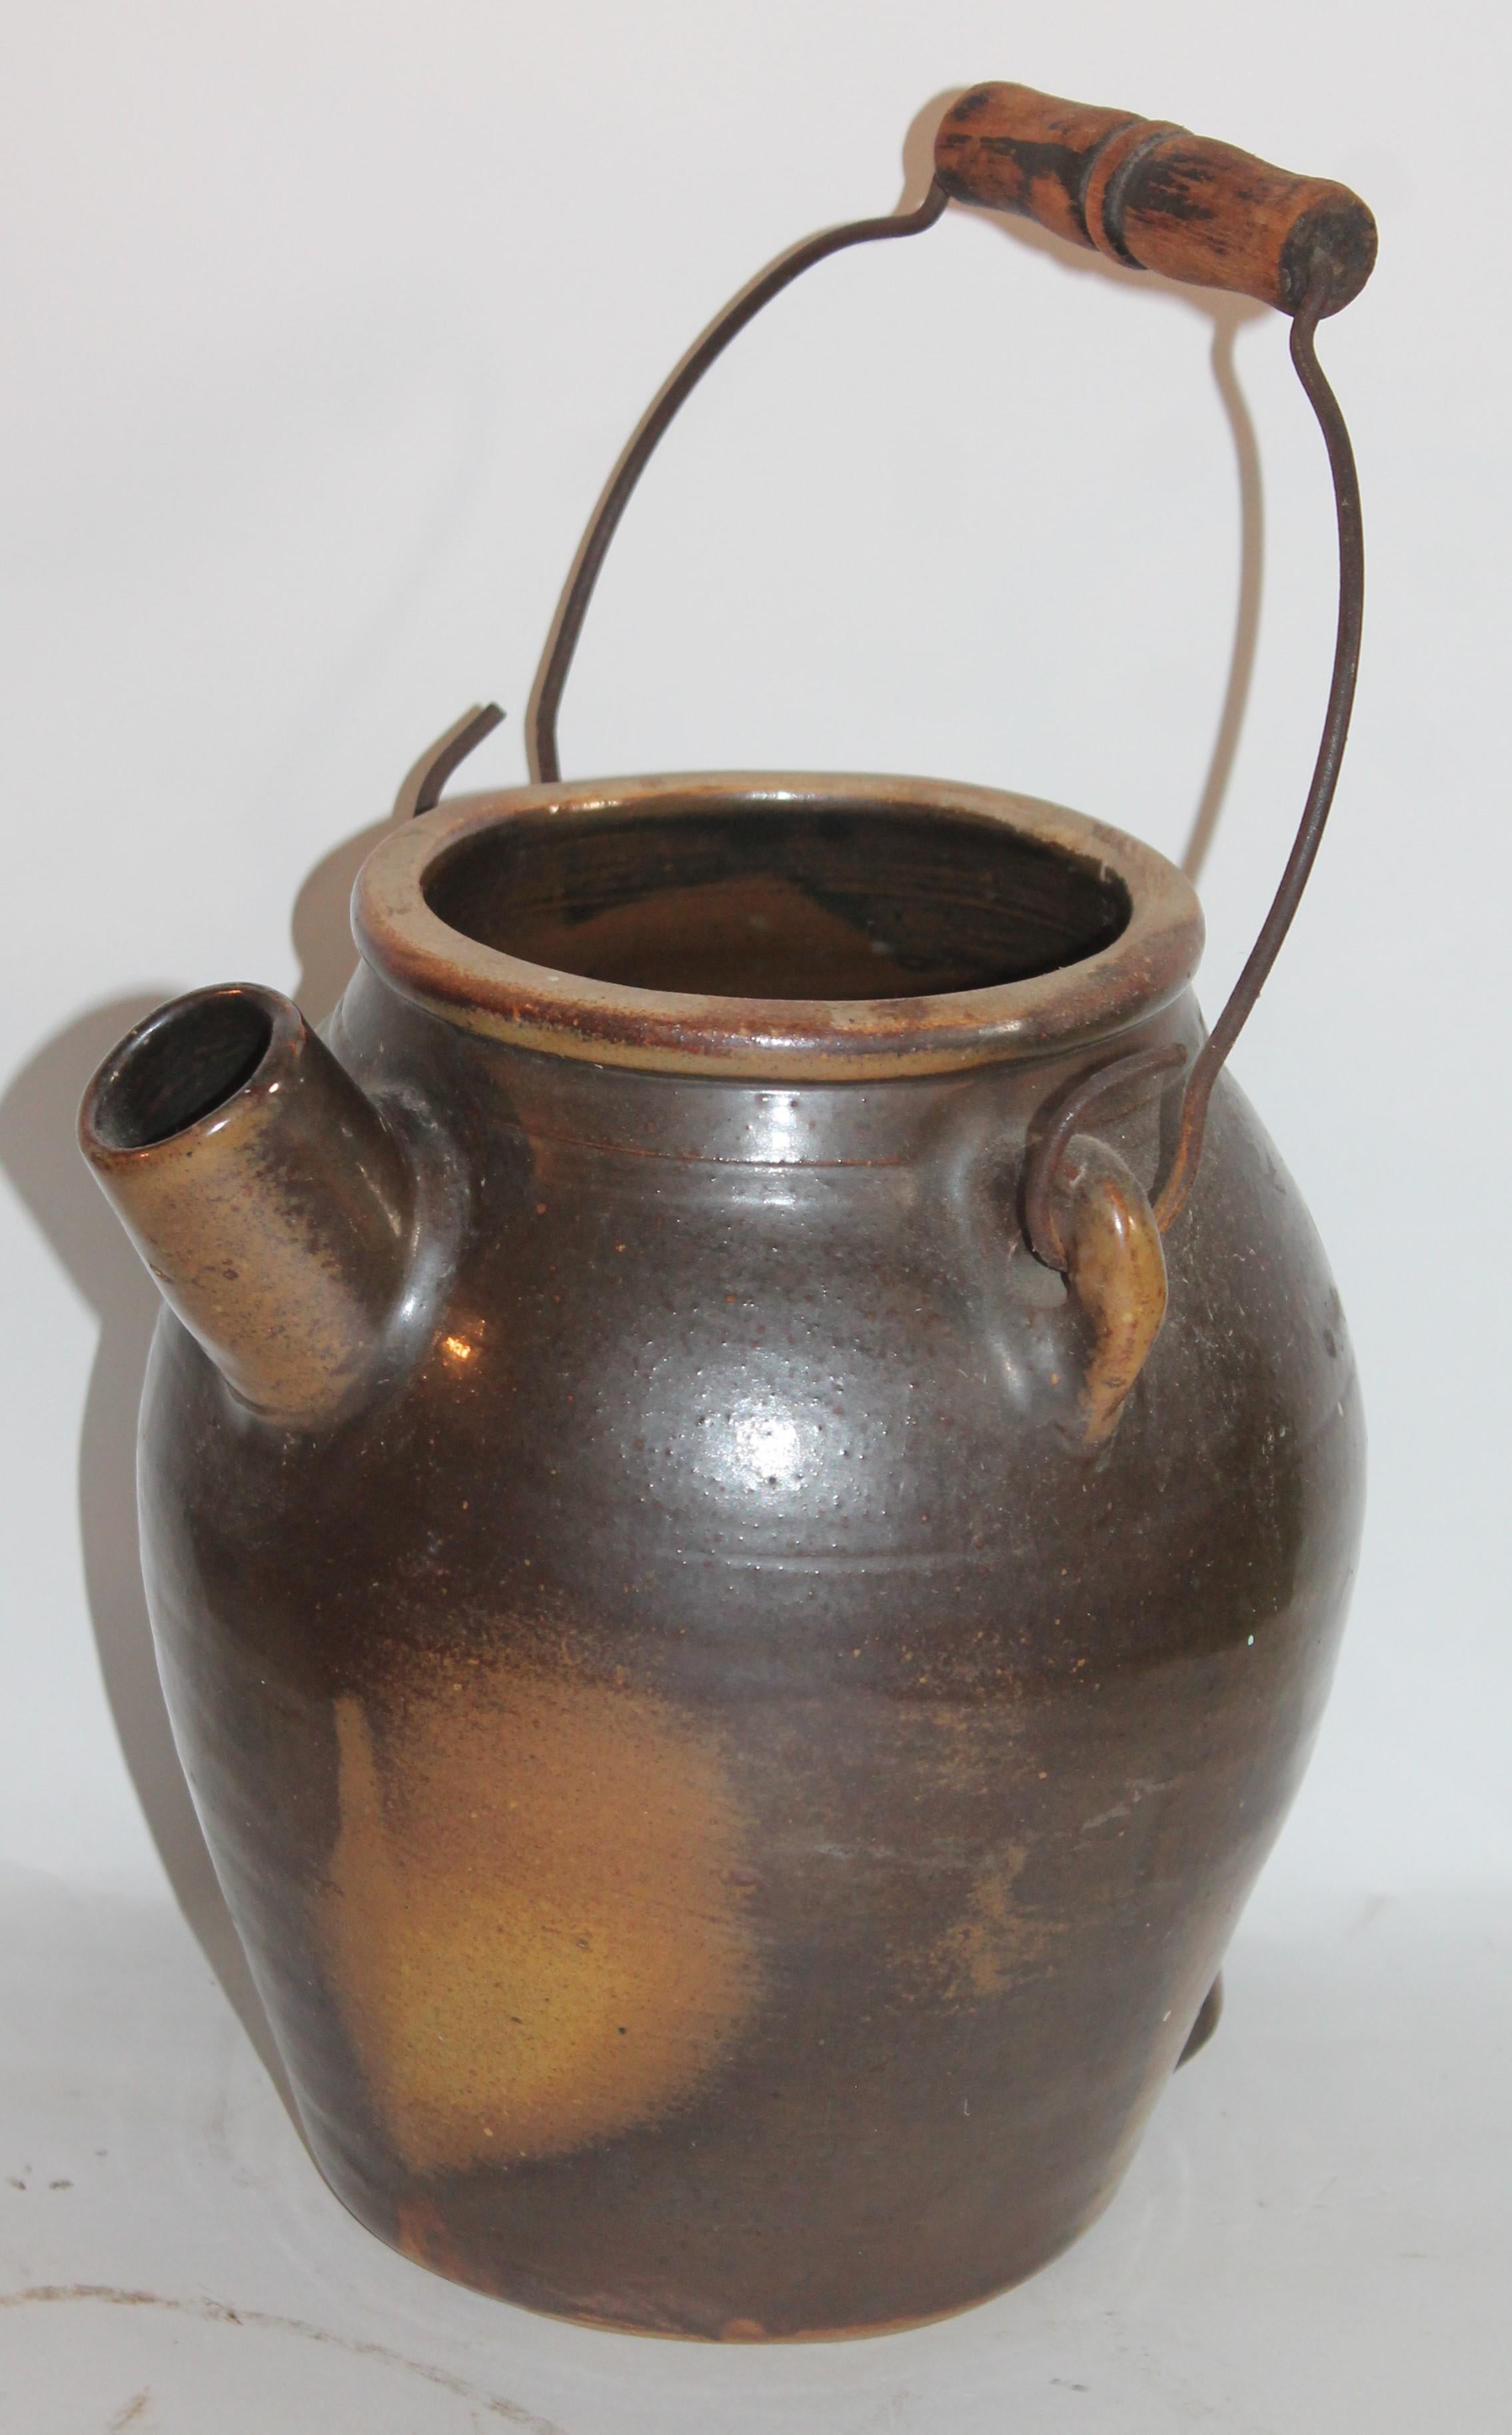 19th century pottery batter jugs with original wire and wood handles from Pennsylvania in fine condition.
Measures: 7 D x 8 W x 9 H brown
8 D x 8.5 W x 8.5 H black.